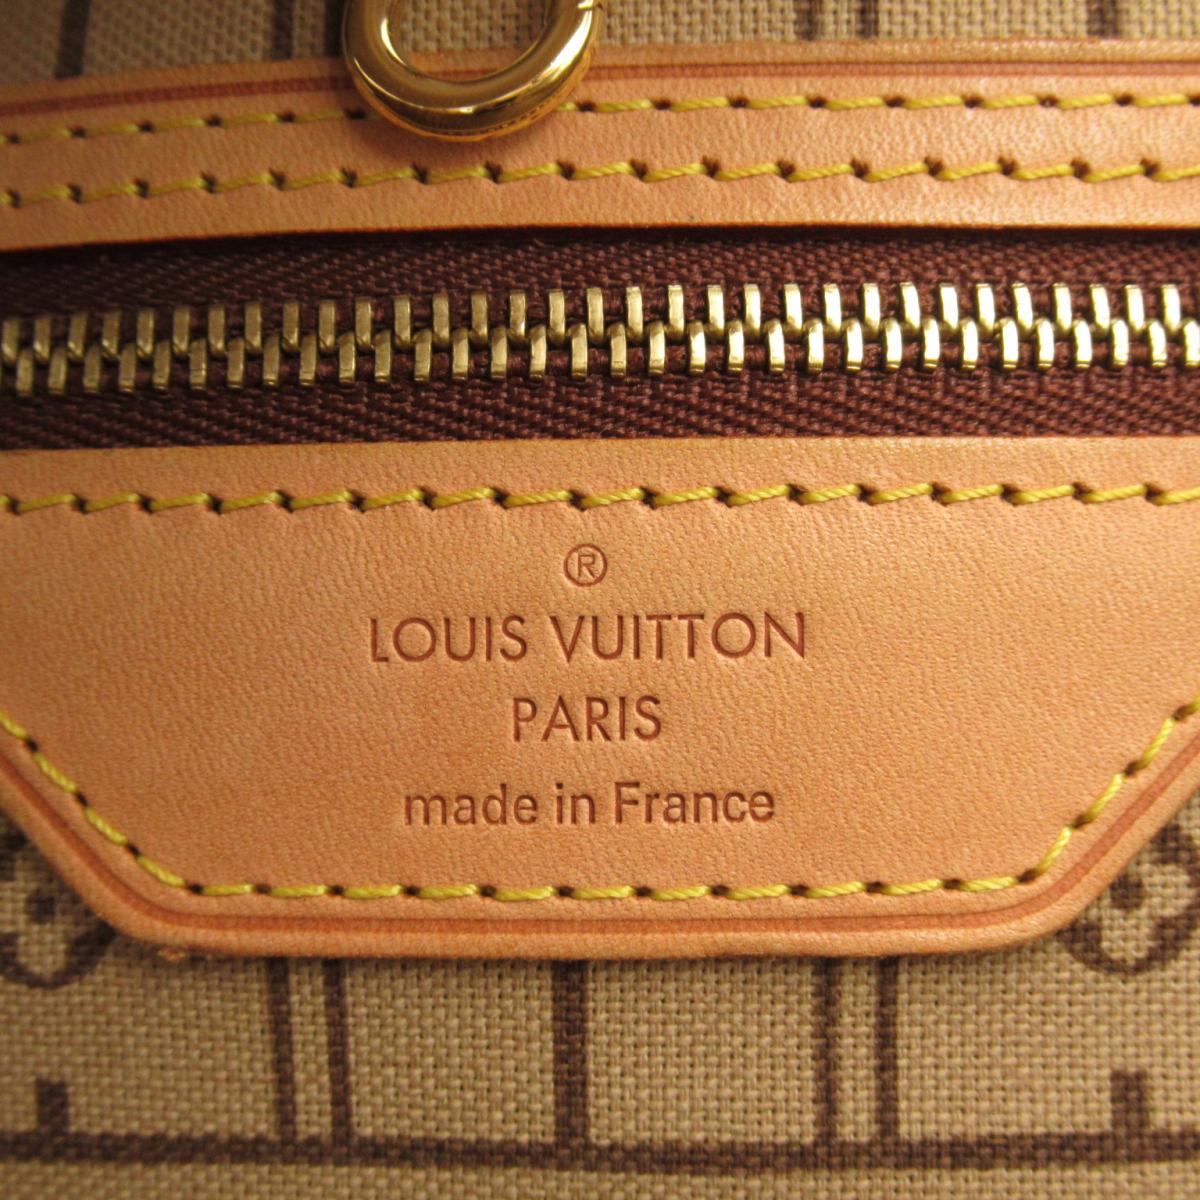 Buy [Used] LOUIS VUITTON Neverfull PM Tote Bag Monogram M40155 from Japan -  Buy authentic Plus exclusive items from Japan